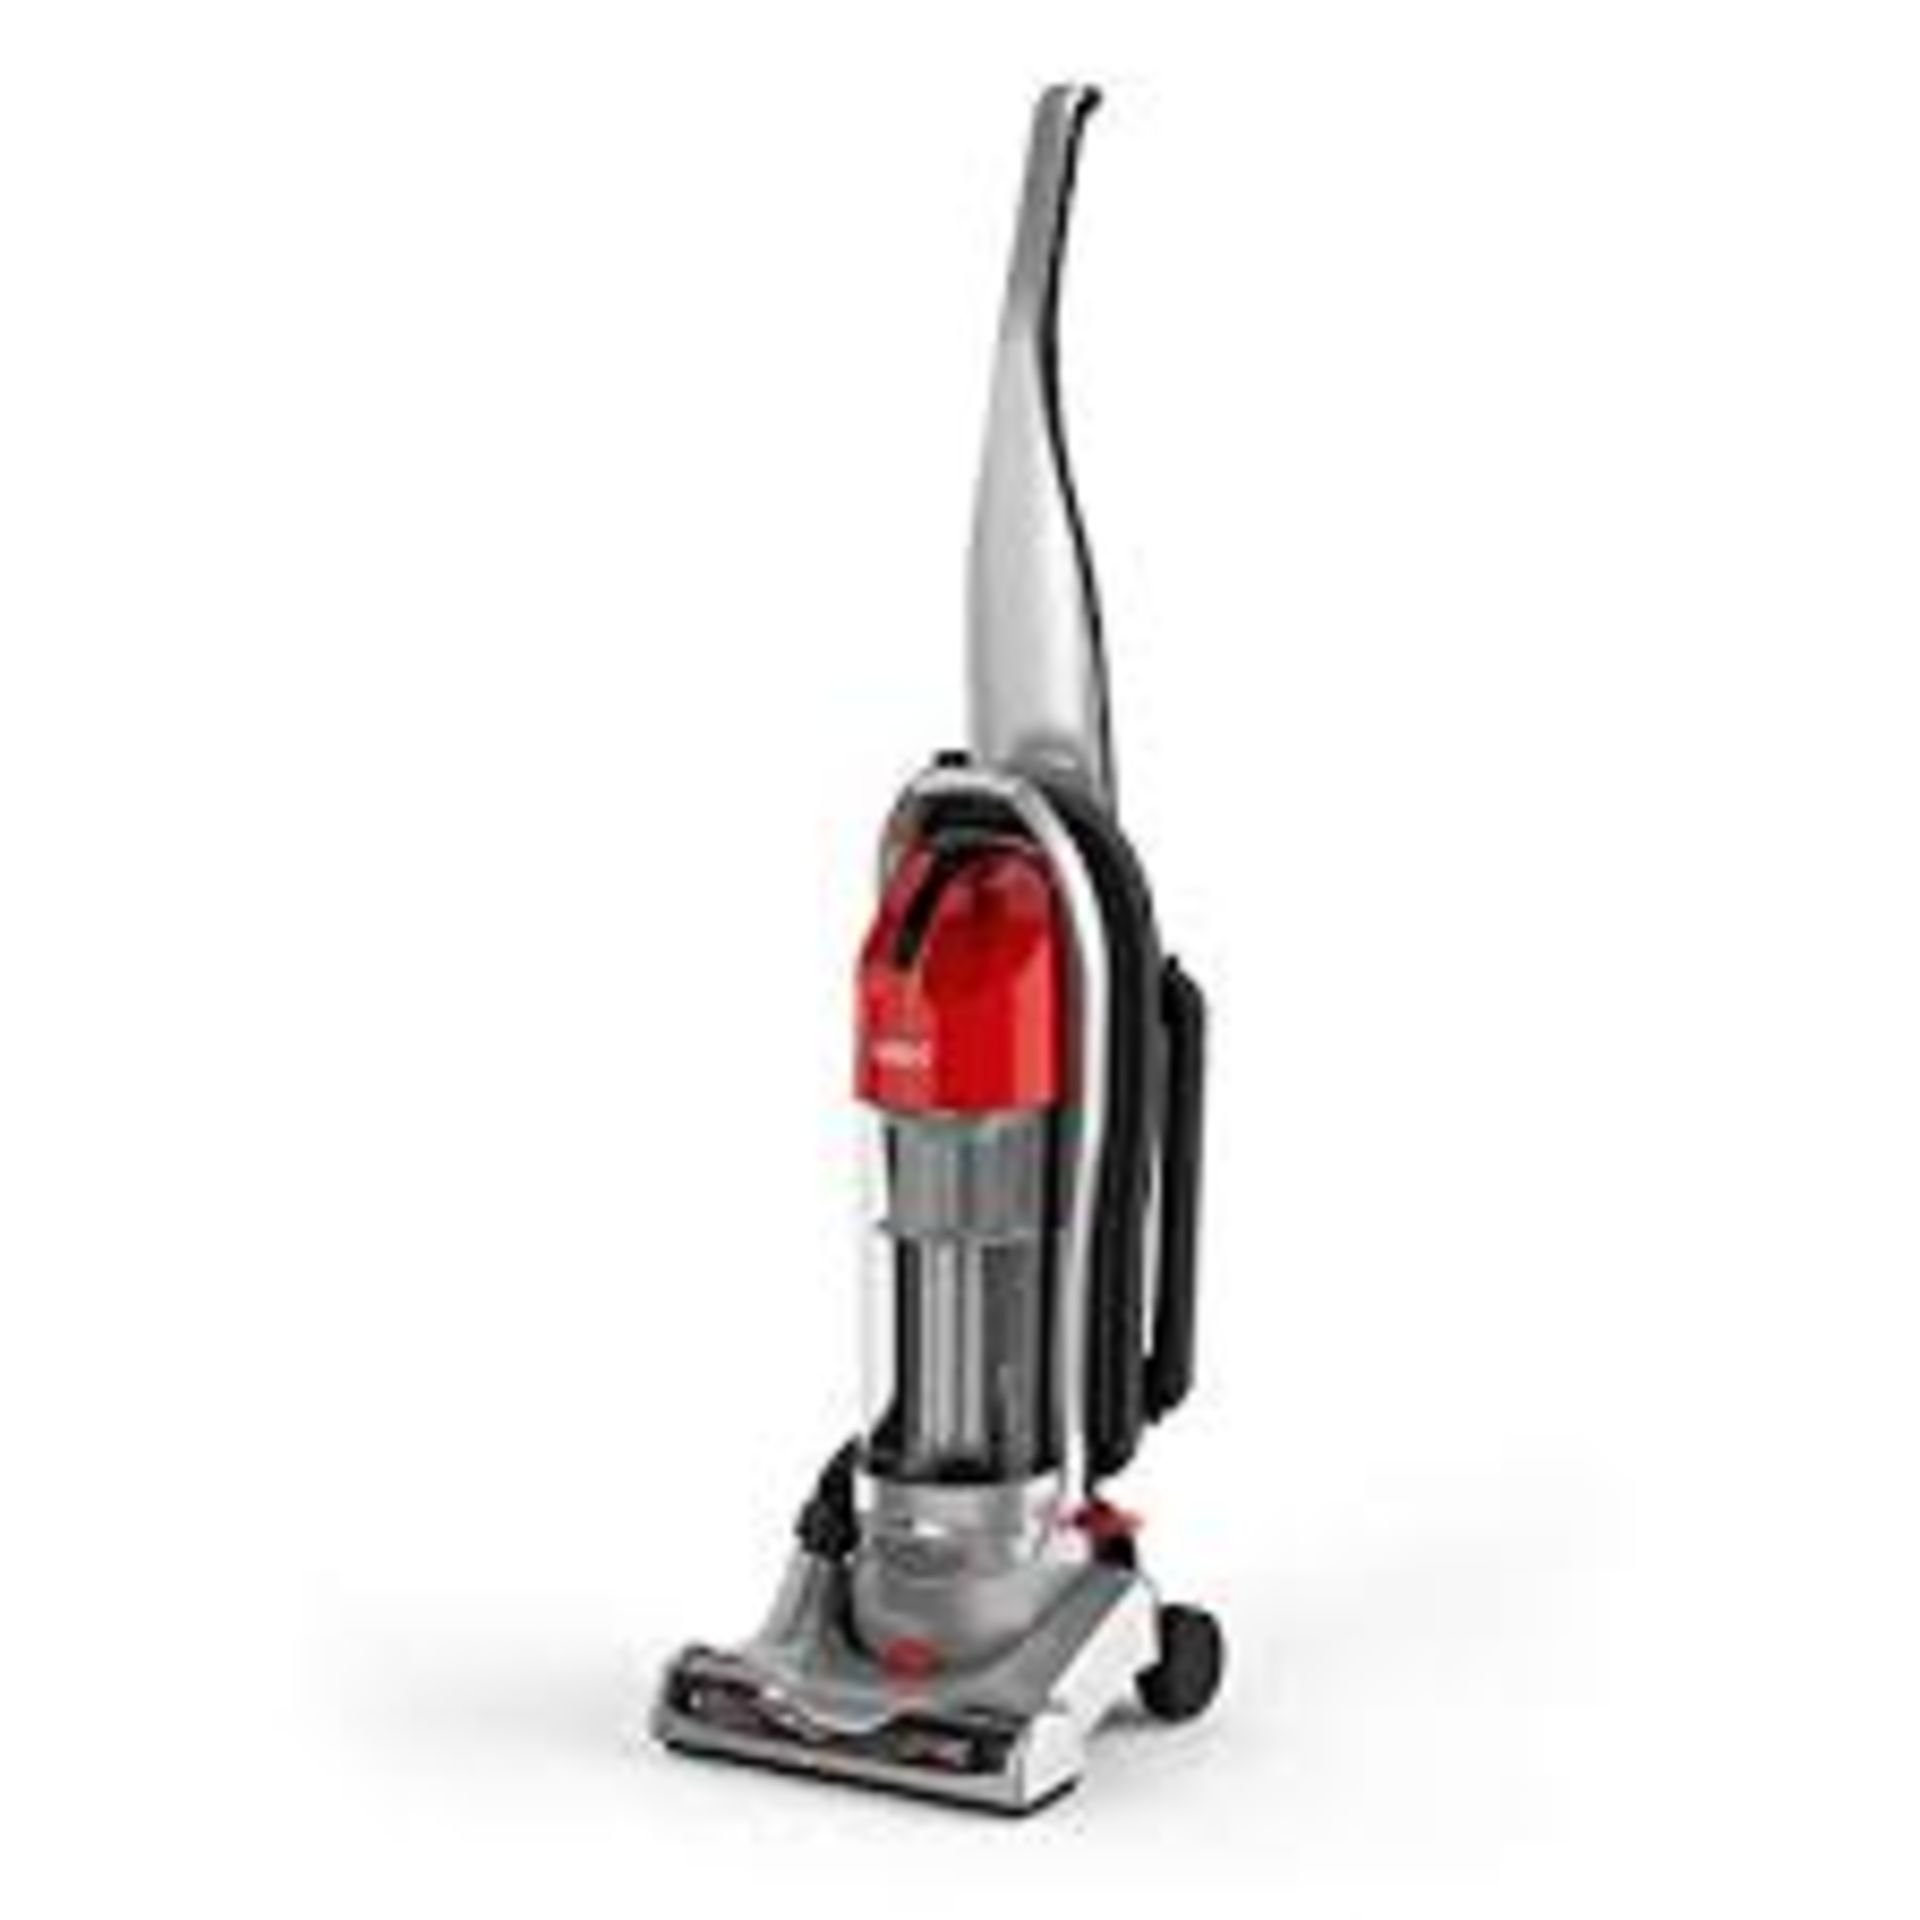 Boxed Vax Power Nano Home Upright Vacuum Cleaner RRP £80 (Public Viewing and Appraisals Available)